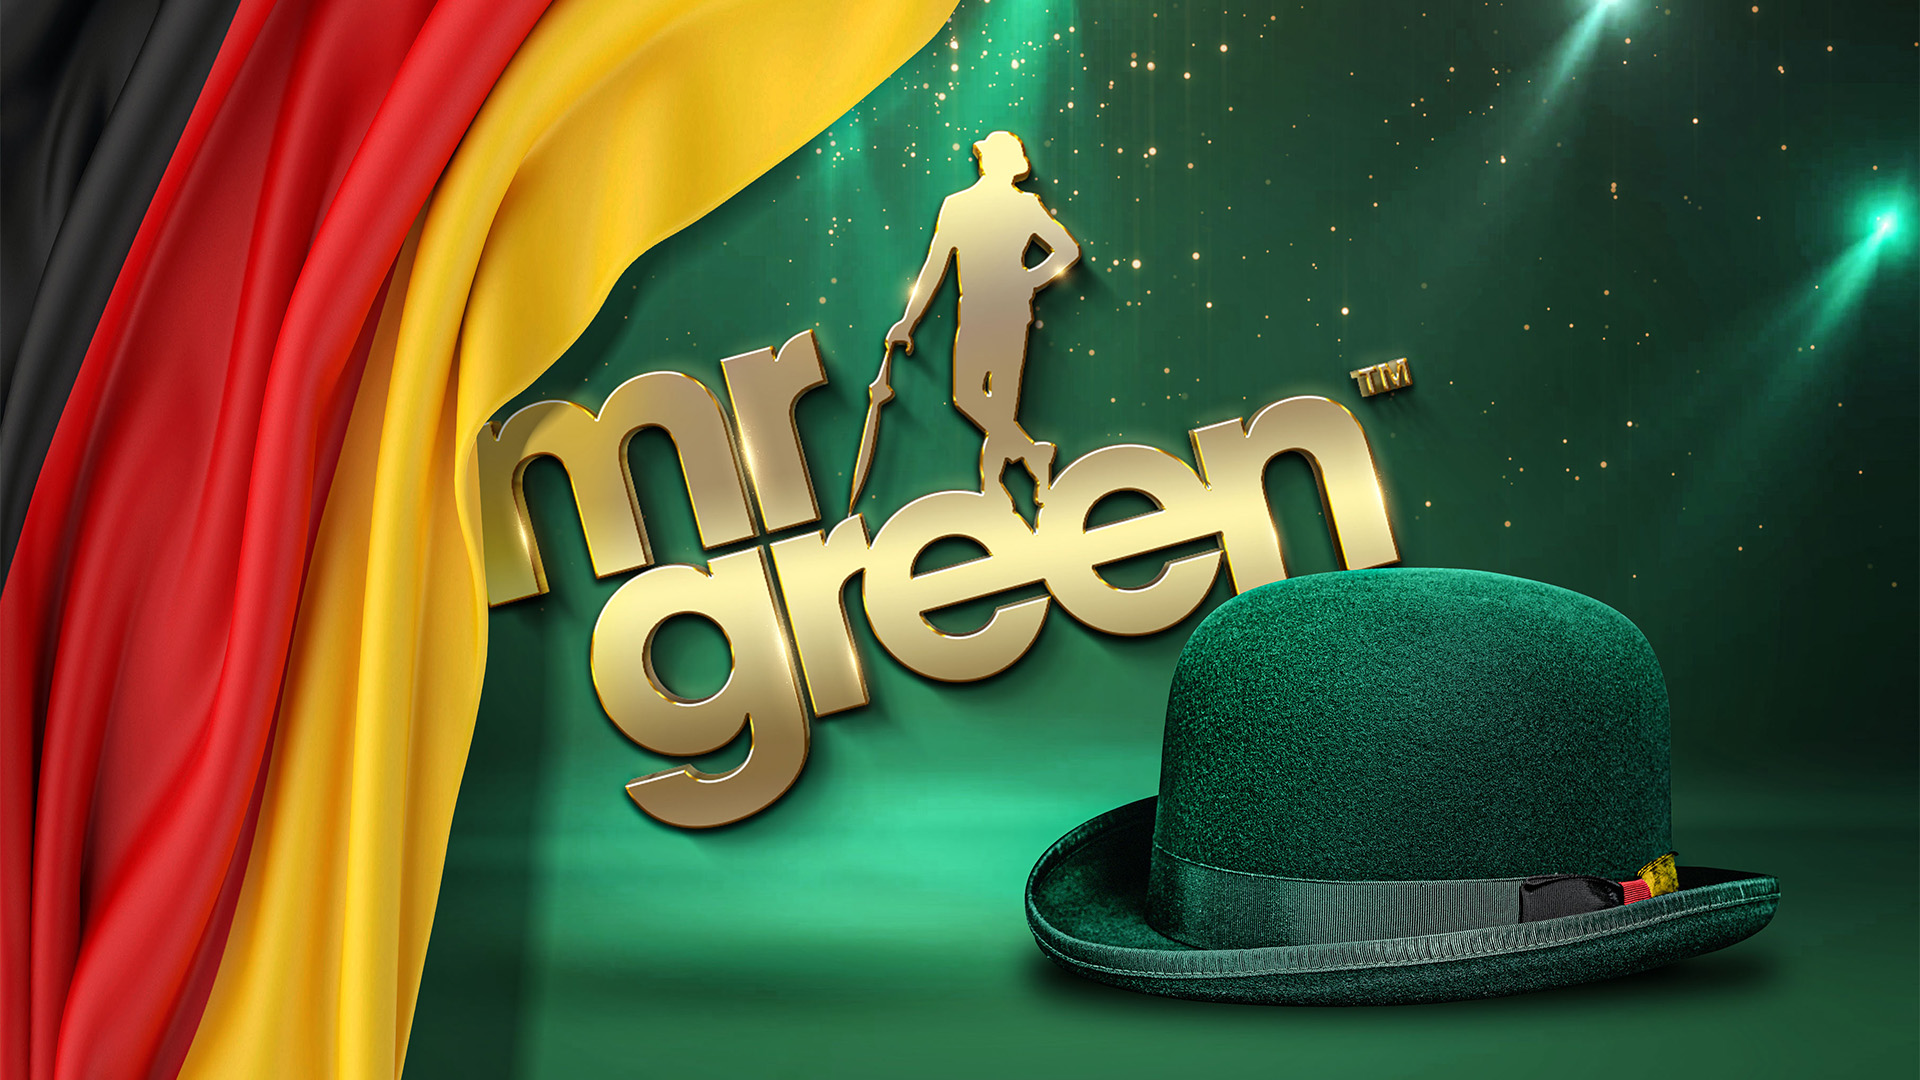 Mr Green launches in Germany on 888’s proprietary technology platform